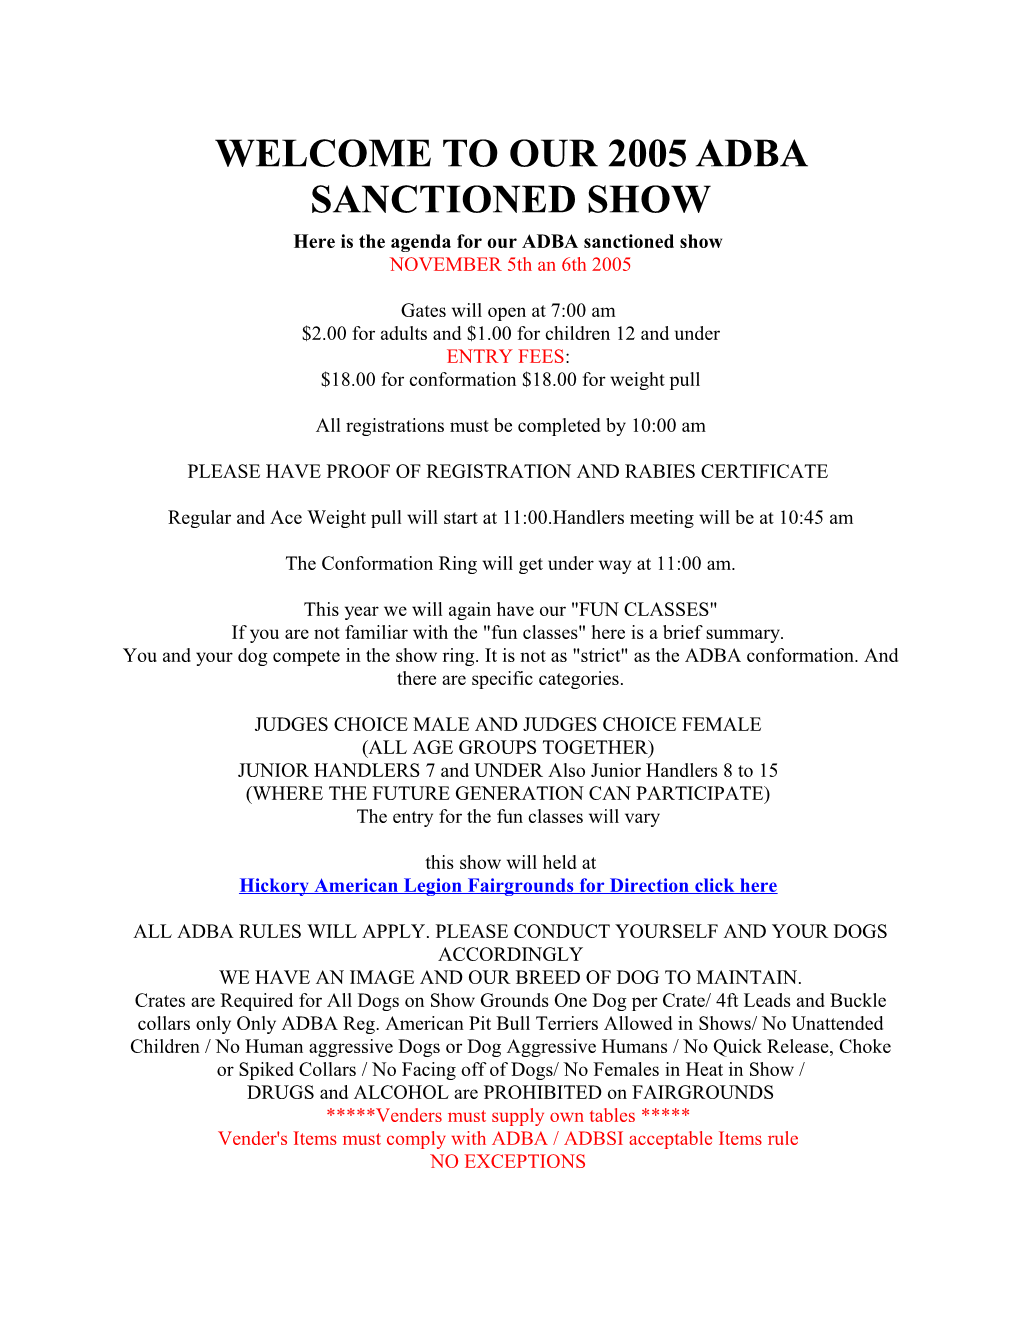 Welcome to Our 2005 Adba Sanctioned Show